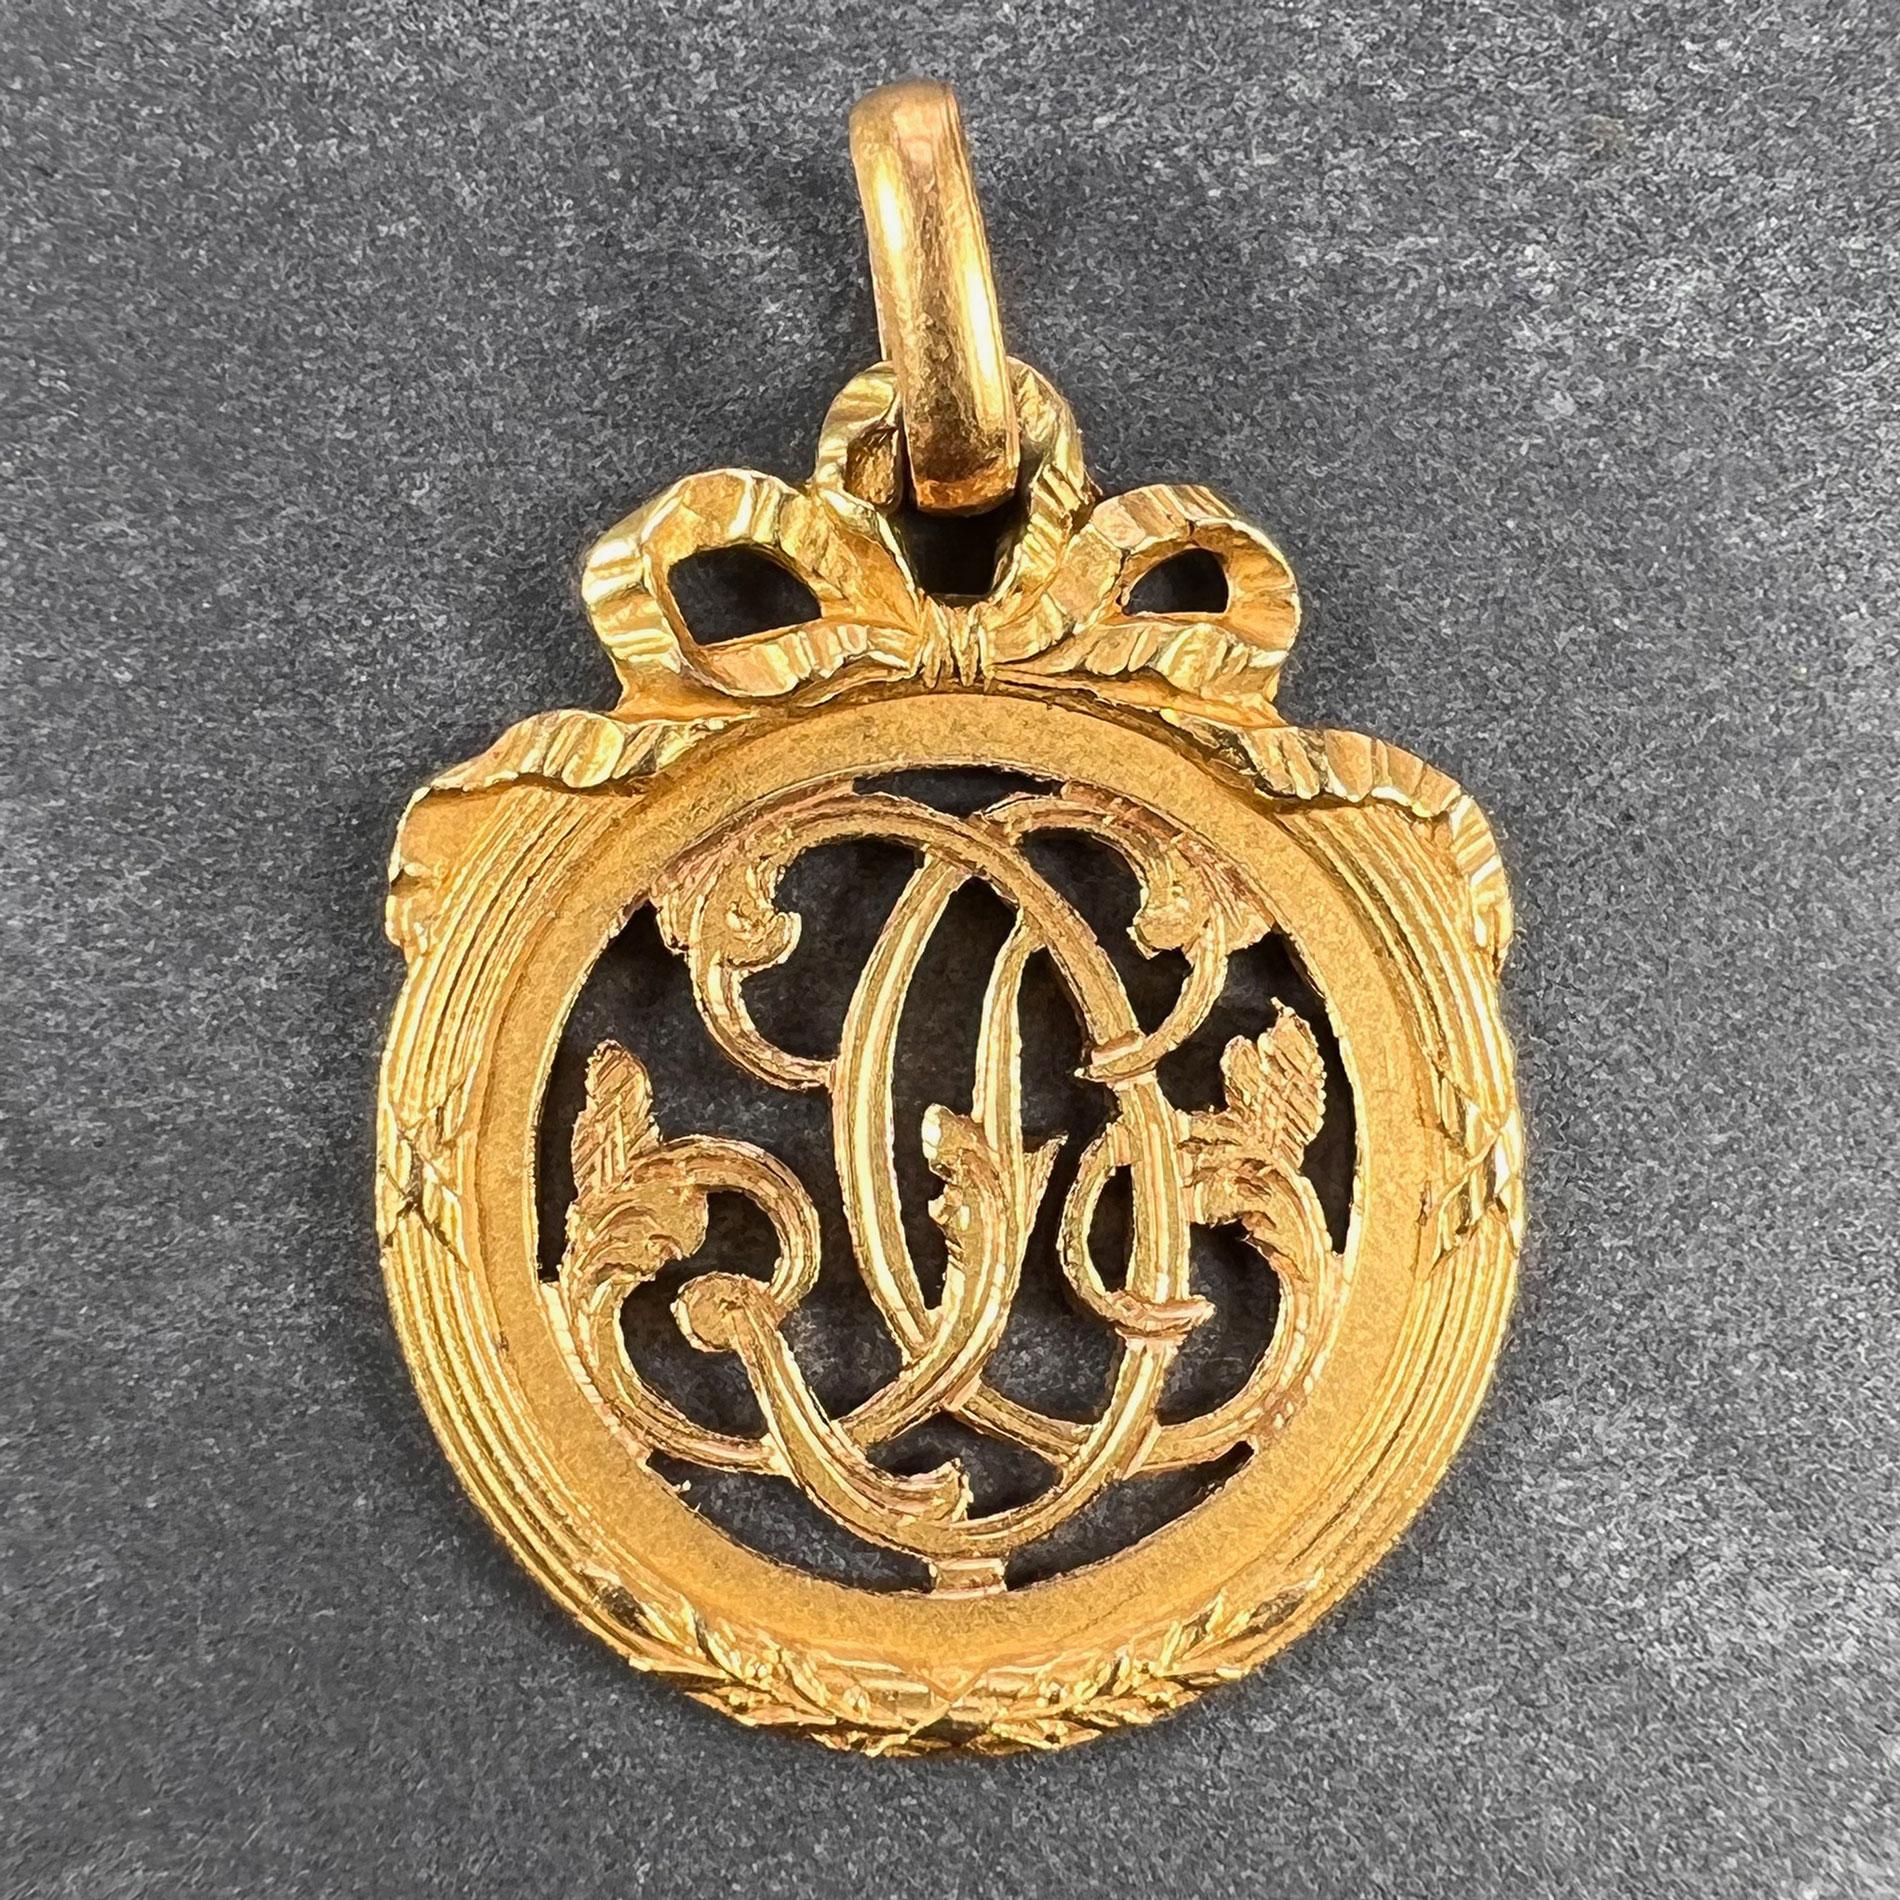 A French 18 karat (18K) yellow gold charm pendant  designed as a medal with a reeded border entwined with ribbons and surmounted with a bow, detailing the monogram DC. Stamped with the eagle mark for 18 karat gold and French